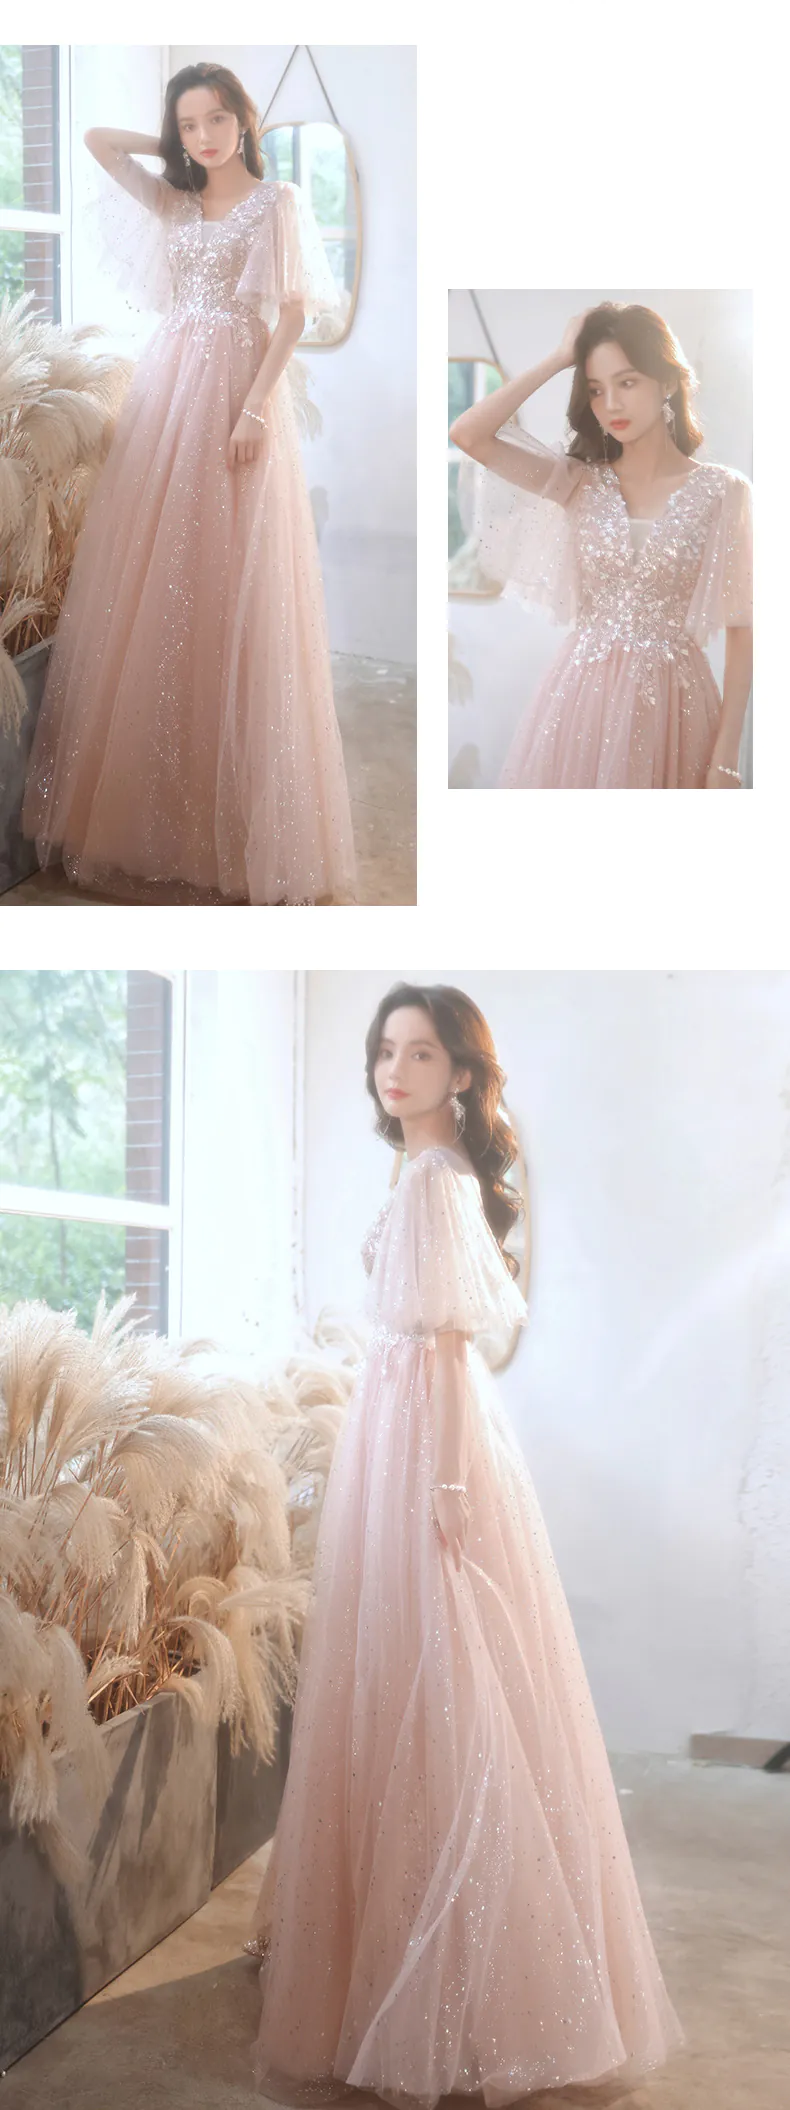 Classy-Flutter-Sleeve-Pink-Tulle-Formal-Evening-Party-Dress-Ball-Gown11